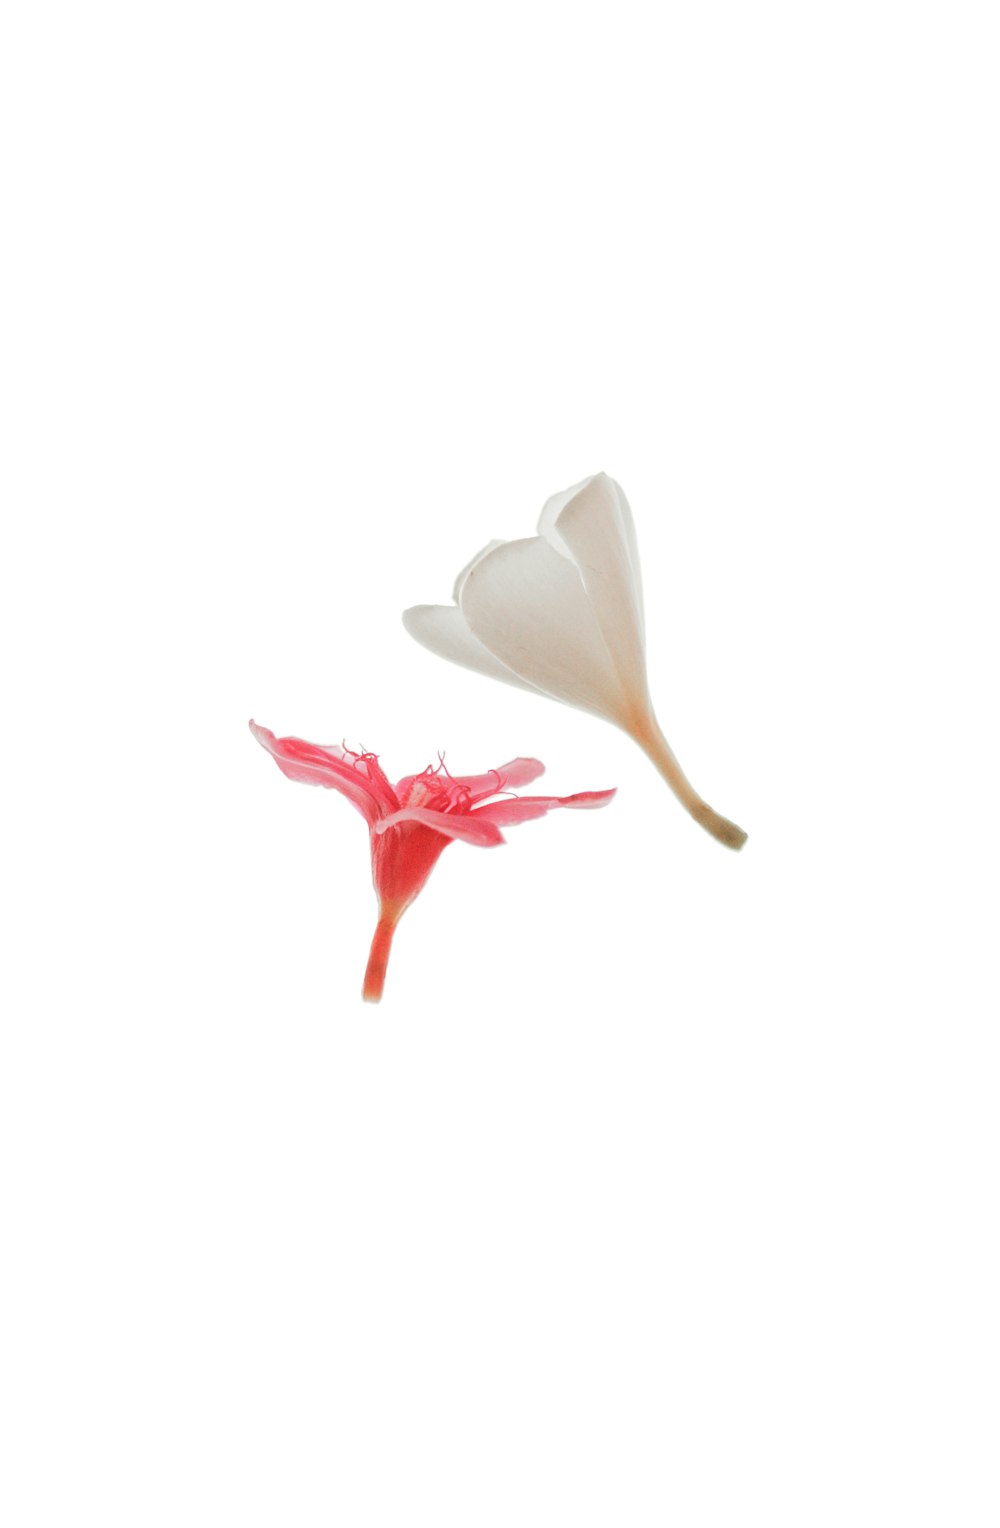 white and red flower petals